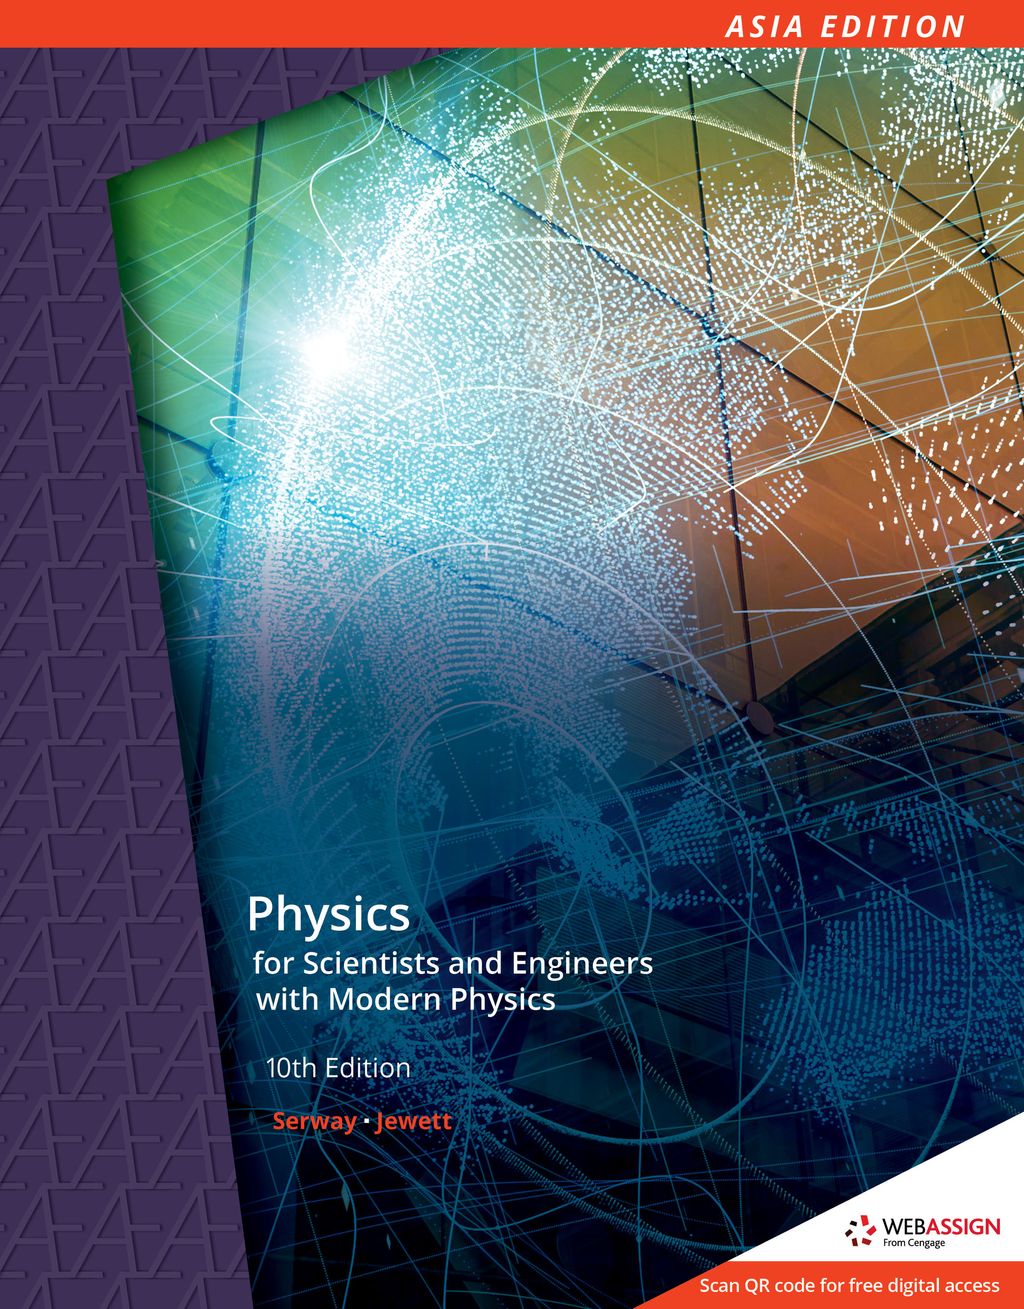 9789814834308 AE Physcis for Scientists and Enigineers with Modern Physics 10E Serway.jpg